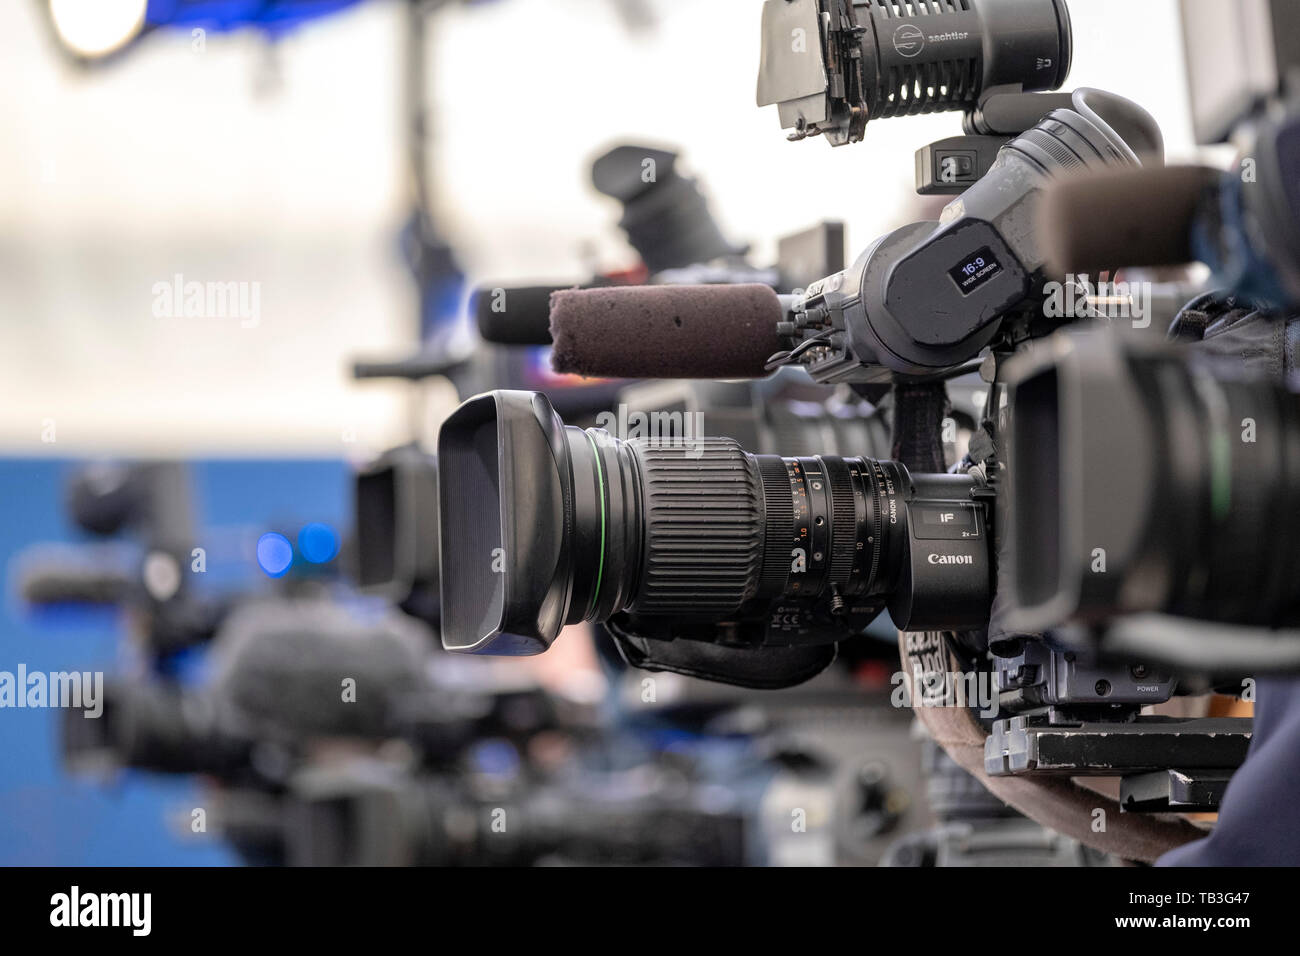 TV News cameras covering an event Stock Photo